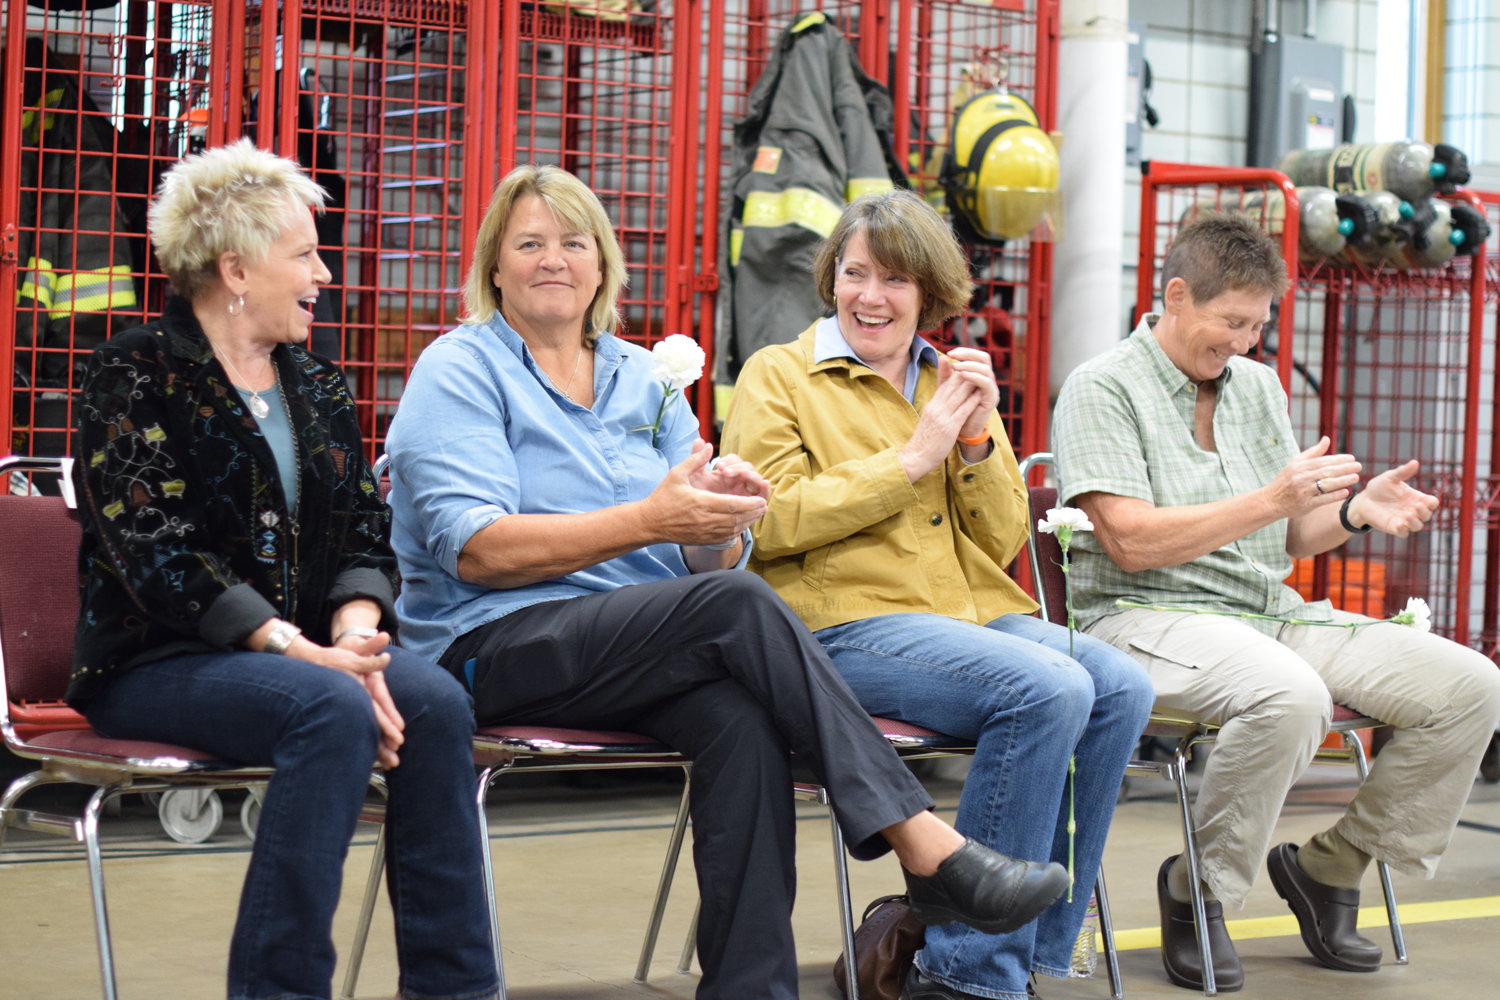 Vicki Hoff, Mary Mohn, Jean Kidd and Bonnie Bleskachek share laughs and stories as they are recognized on the 30th anniversary of their service as Minneapolis’ first all-women fire crew.